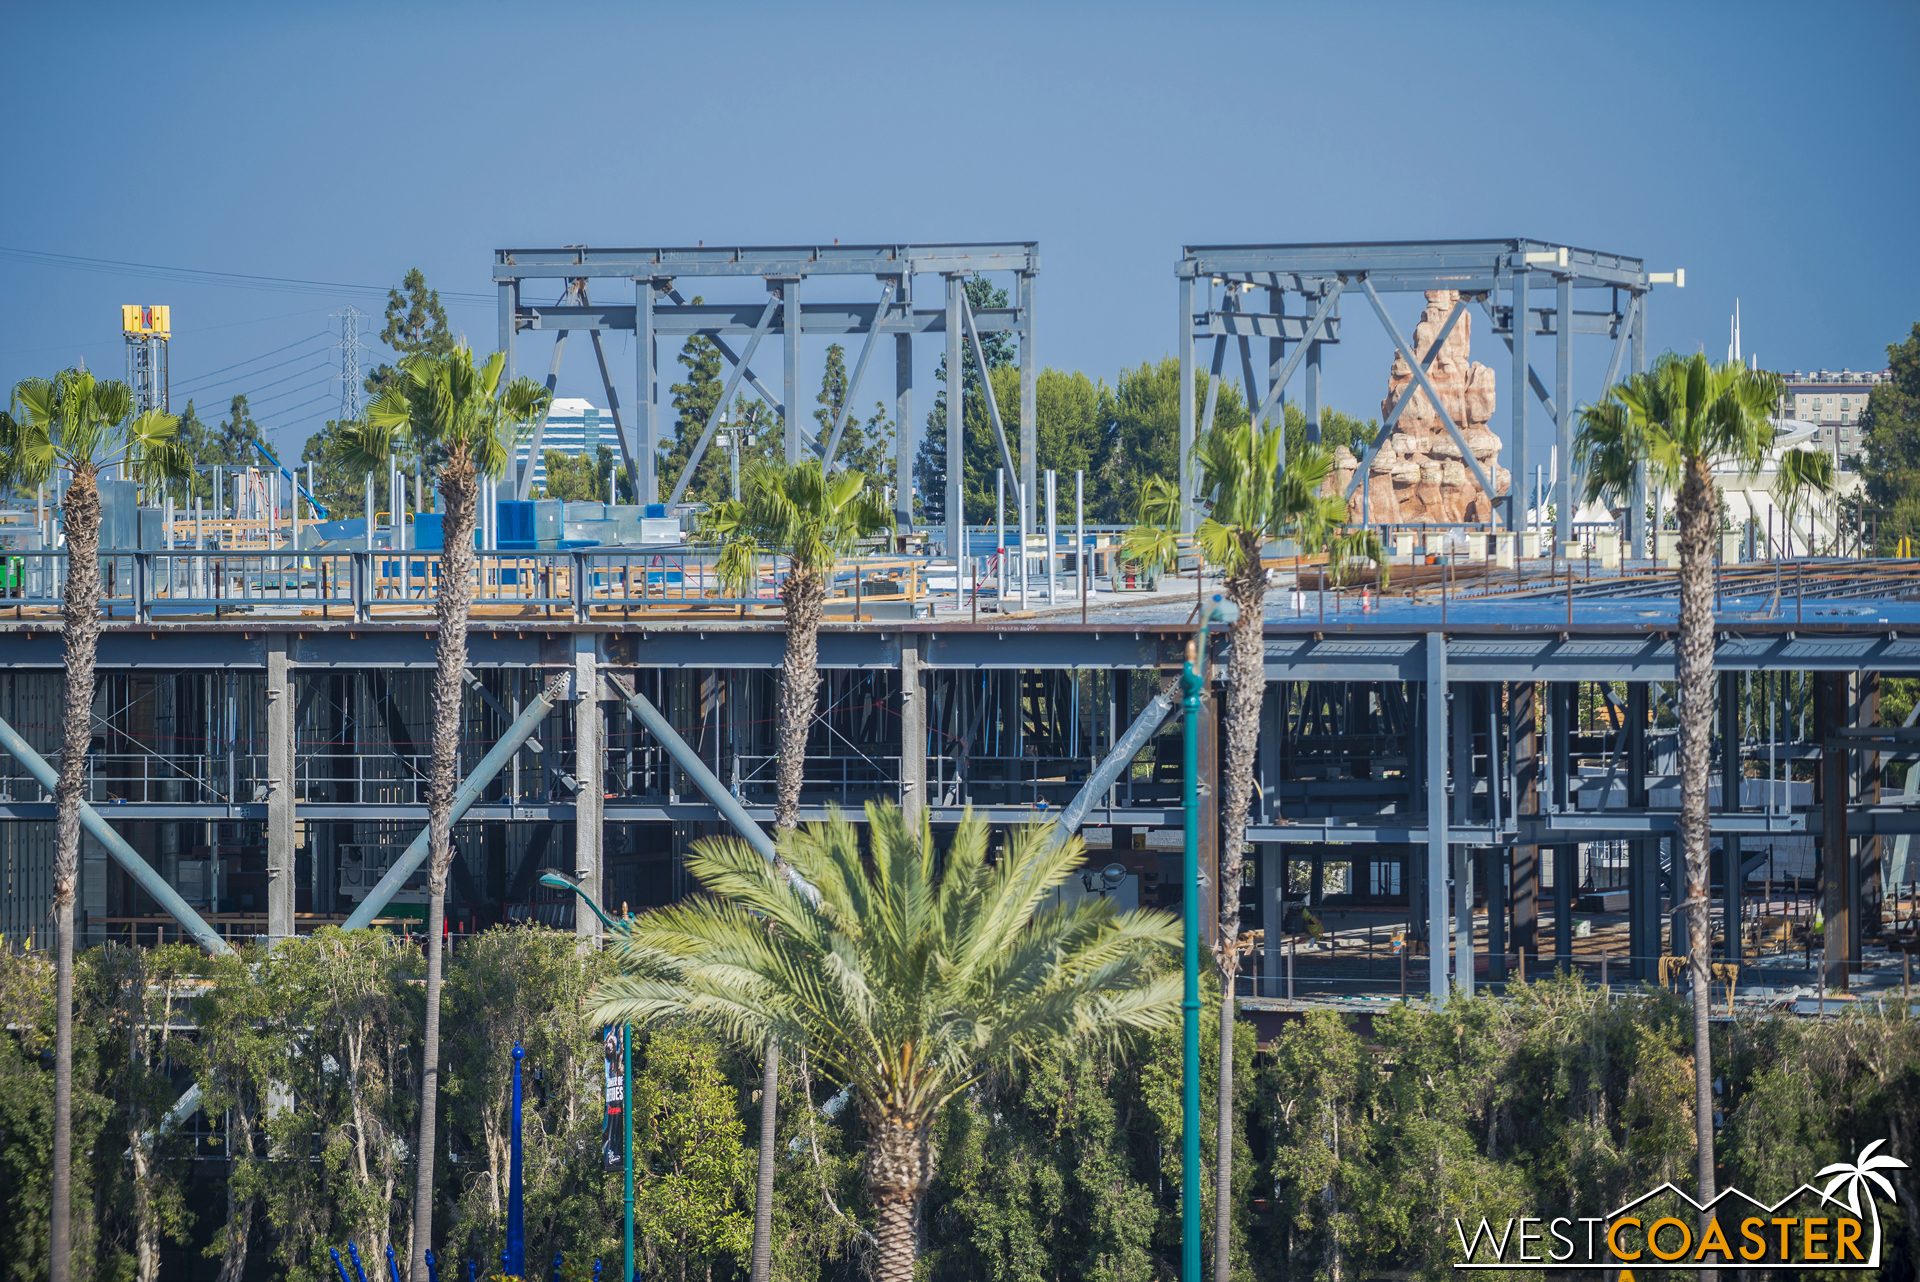  That's kind of exciting.&nbsp; It means we're that much closer to actual ride track and construction happening. 